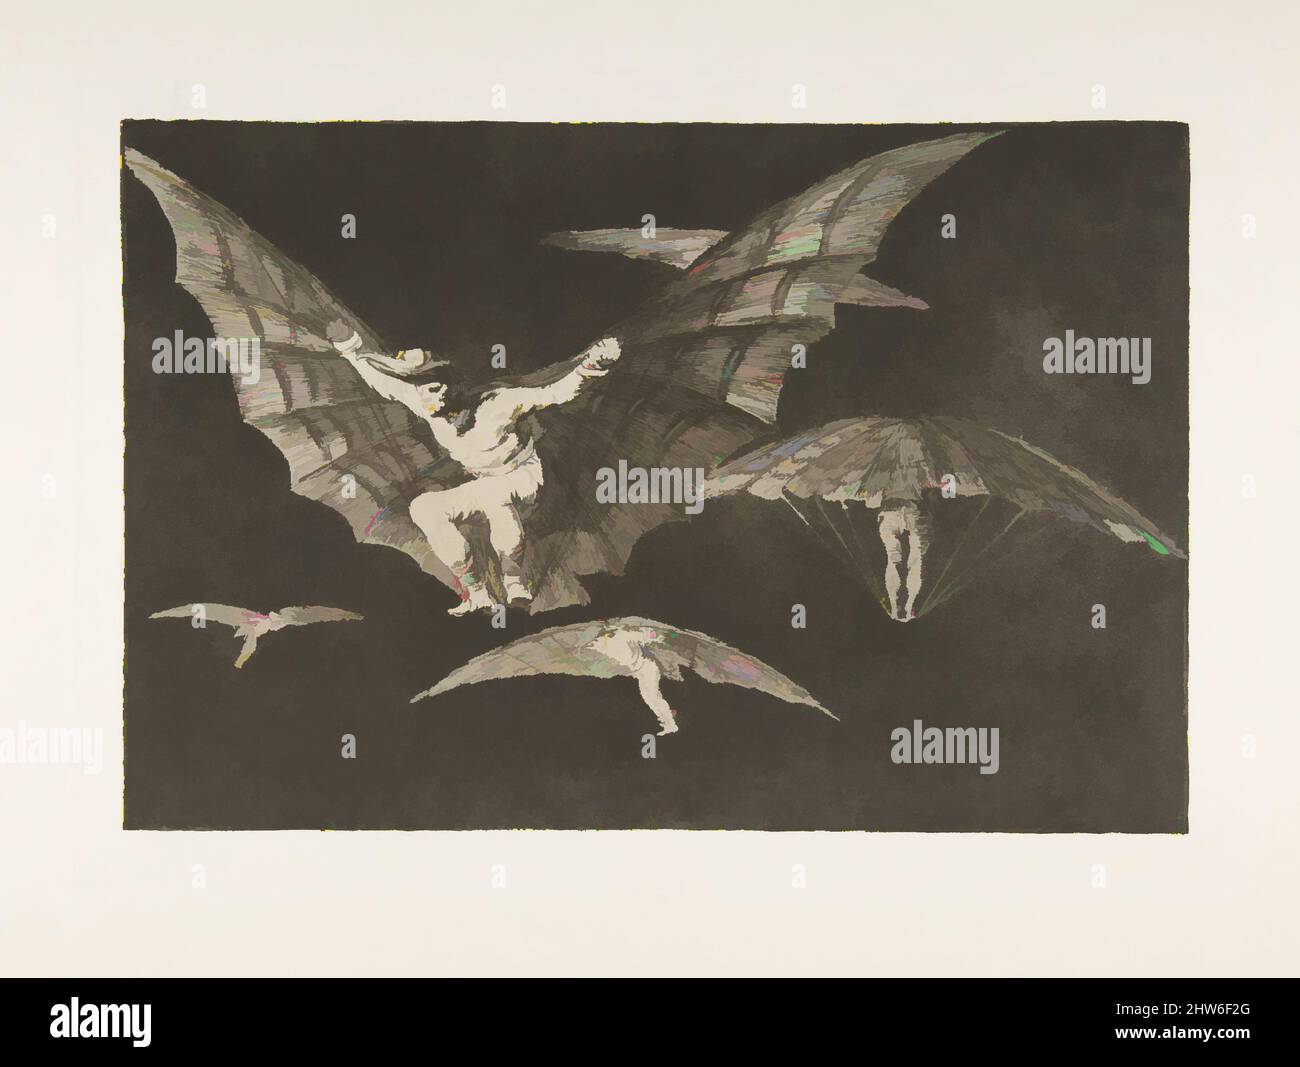 Art inspired by Plate 13 from the 'Disparates': A Way of Flying, ca. 1816–23 (published 1864), Etching, aquatint and drypoint, Plate: 9 5/8 × 13 7/8 in. (24.5 × 35.3 cm), Prints, Goya (Francisco de Goya y Lucientes) (Spanish, Fuendetodos 1746–1828 Bordeaux), From the posthumous first, Classic works modernized by Artotop with a splash of modernity. Shapes, color and value, eye-catching visual impact on art. Emotions through freedom of artworks in a contemporary way. A timeless message pursuing a wildly creative new direction. Artists turning to the digital medium and creating the Artotop NFT Stock Photo